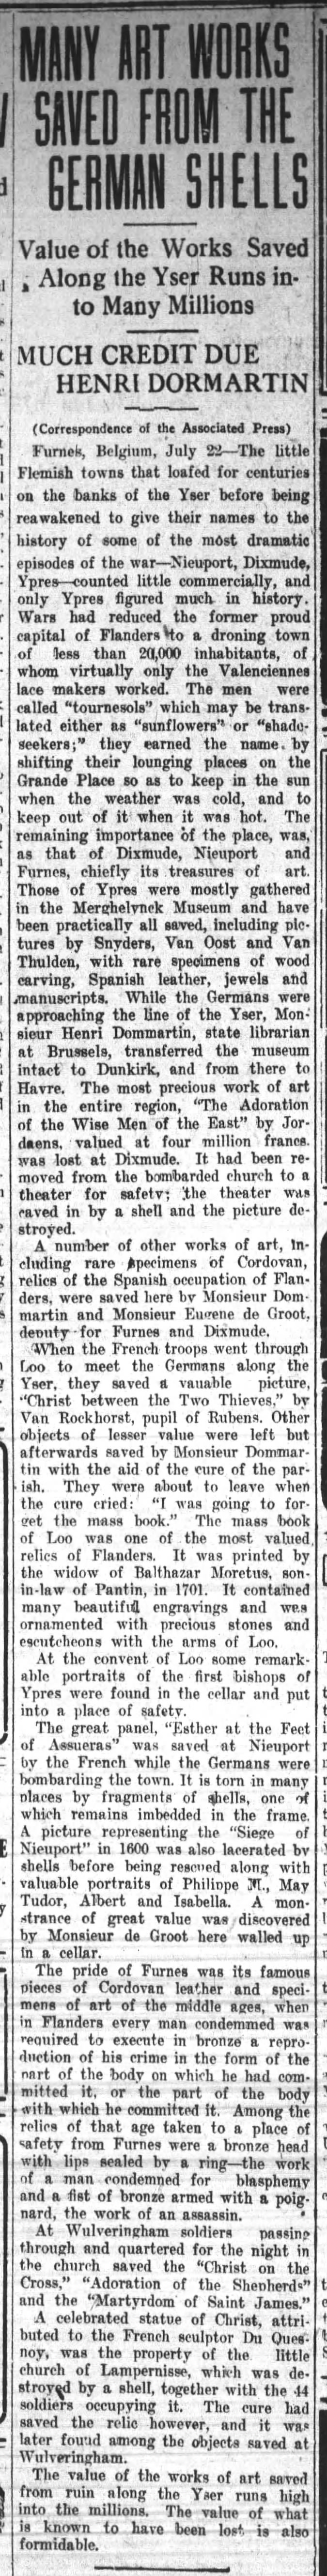 Dommartin saves Belgian art  W-S Journal 24 July 1915 Page 8